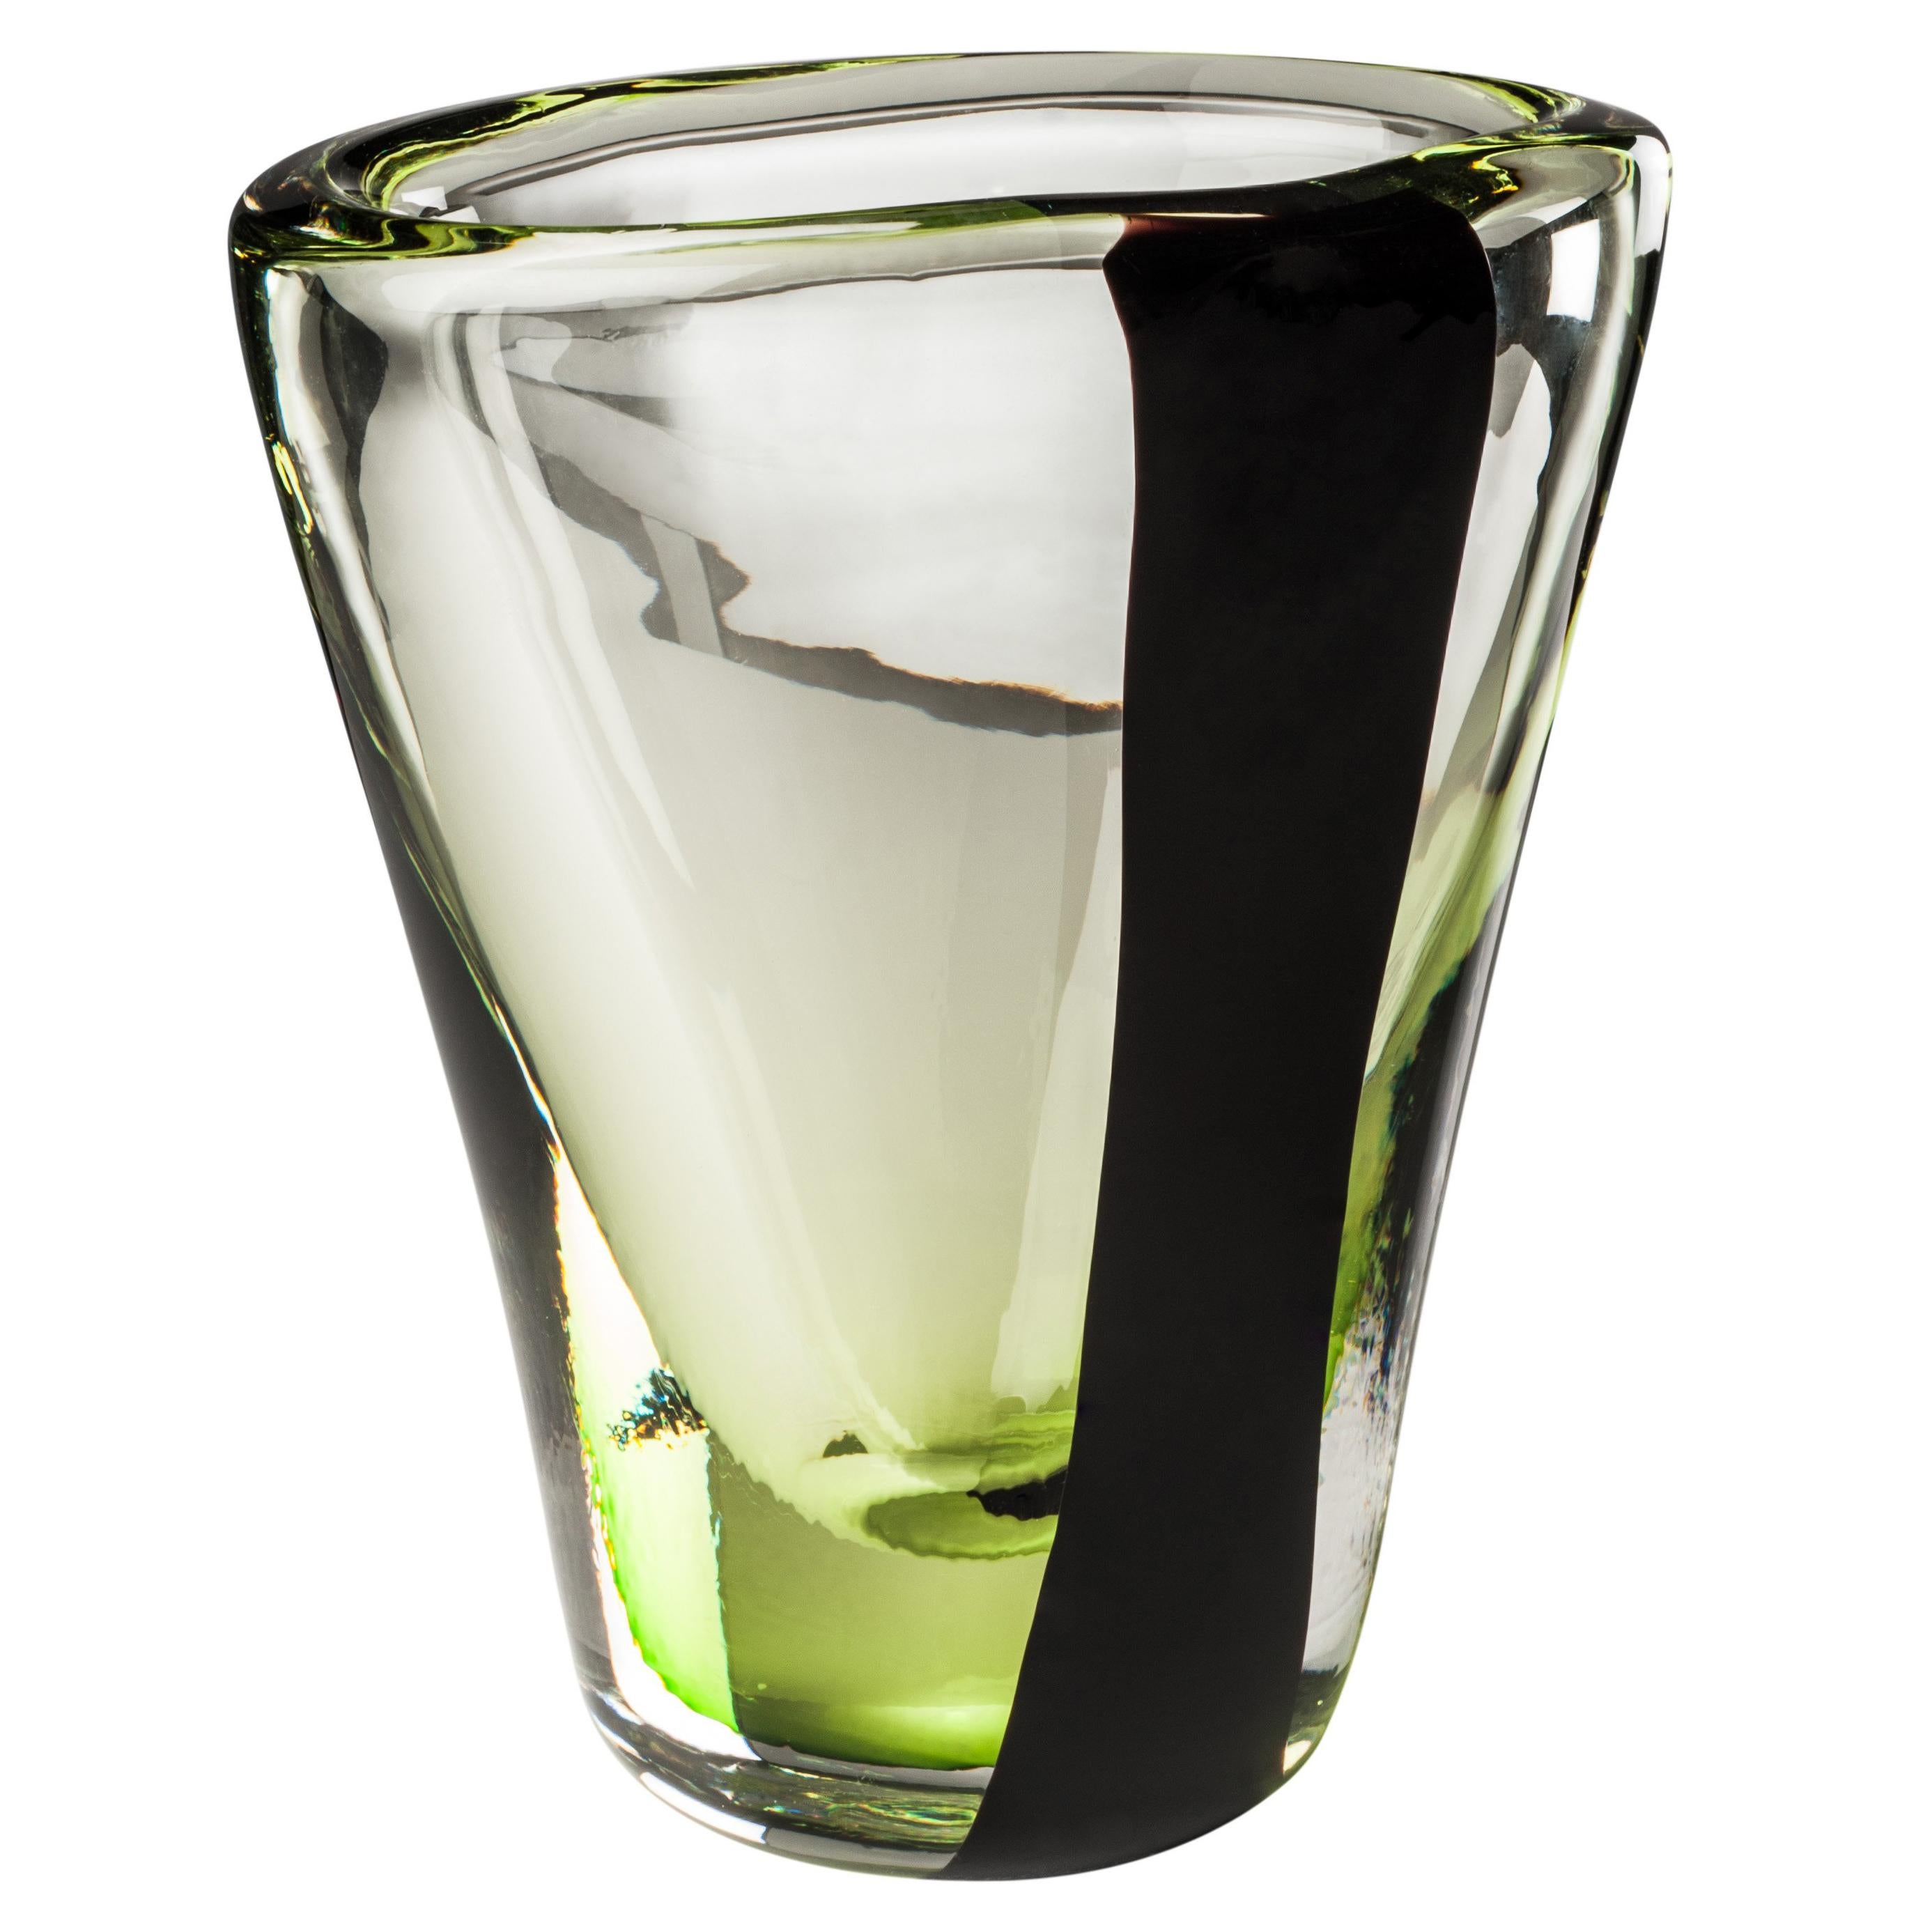 Venini Medium Black Belt Oval Glass Vase in Crystal and Green by Peter Marino For Sale